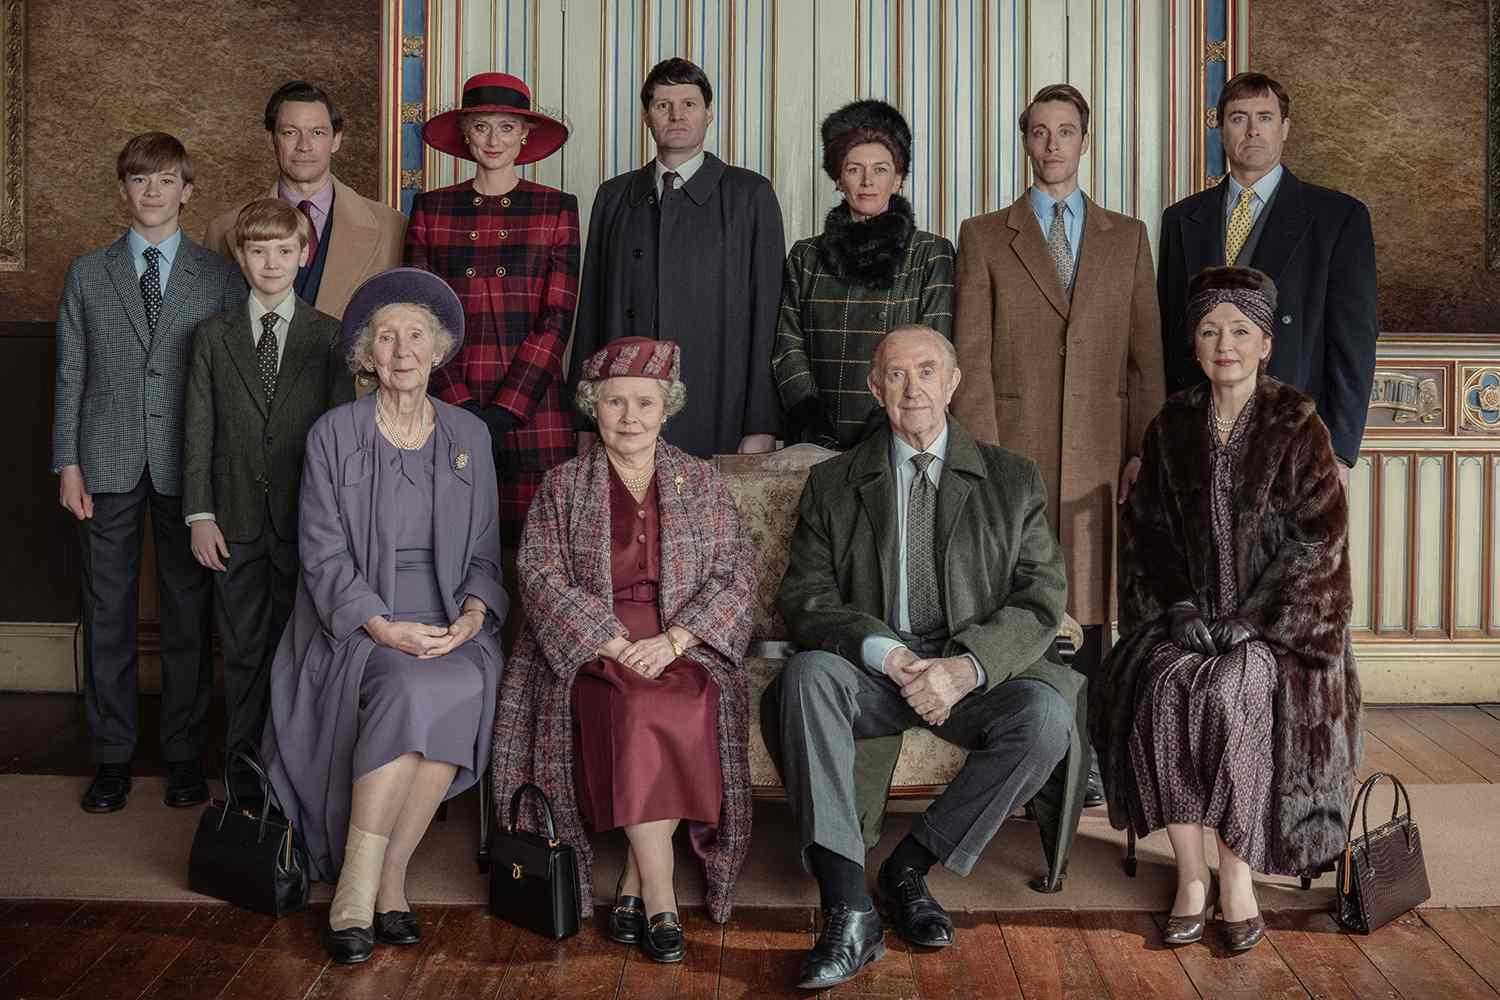 Cast of The Crown (Source: People)